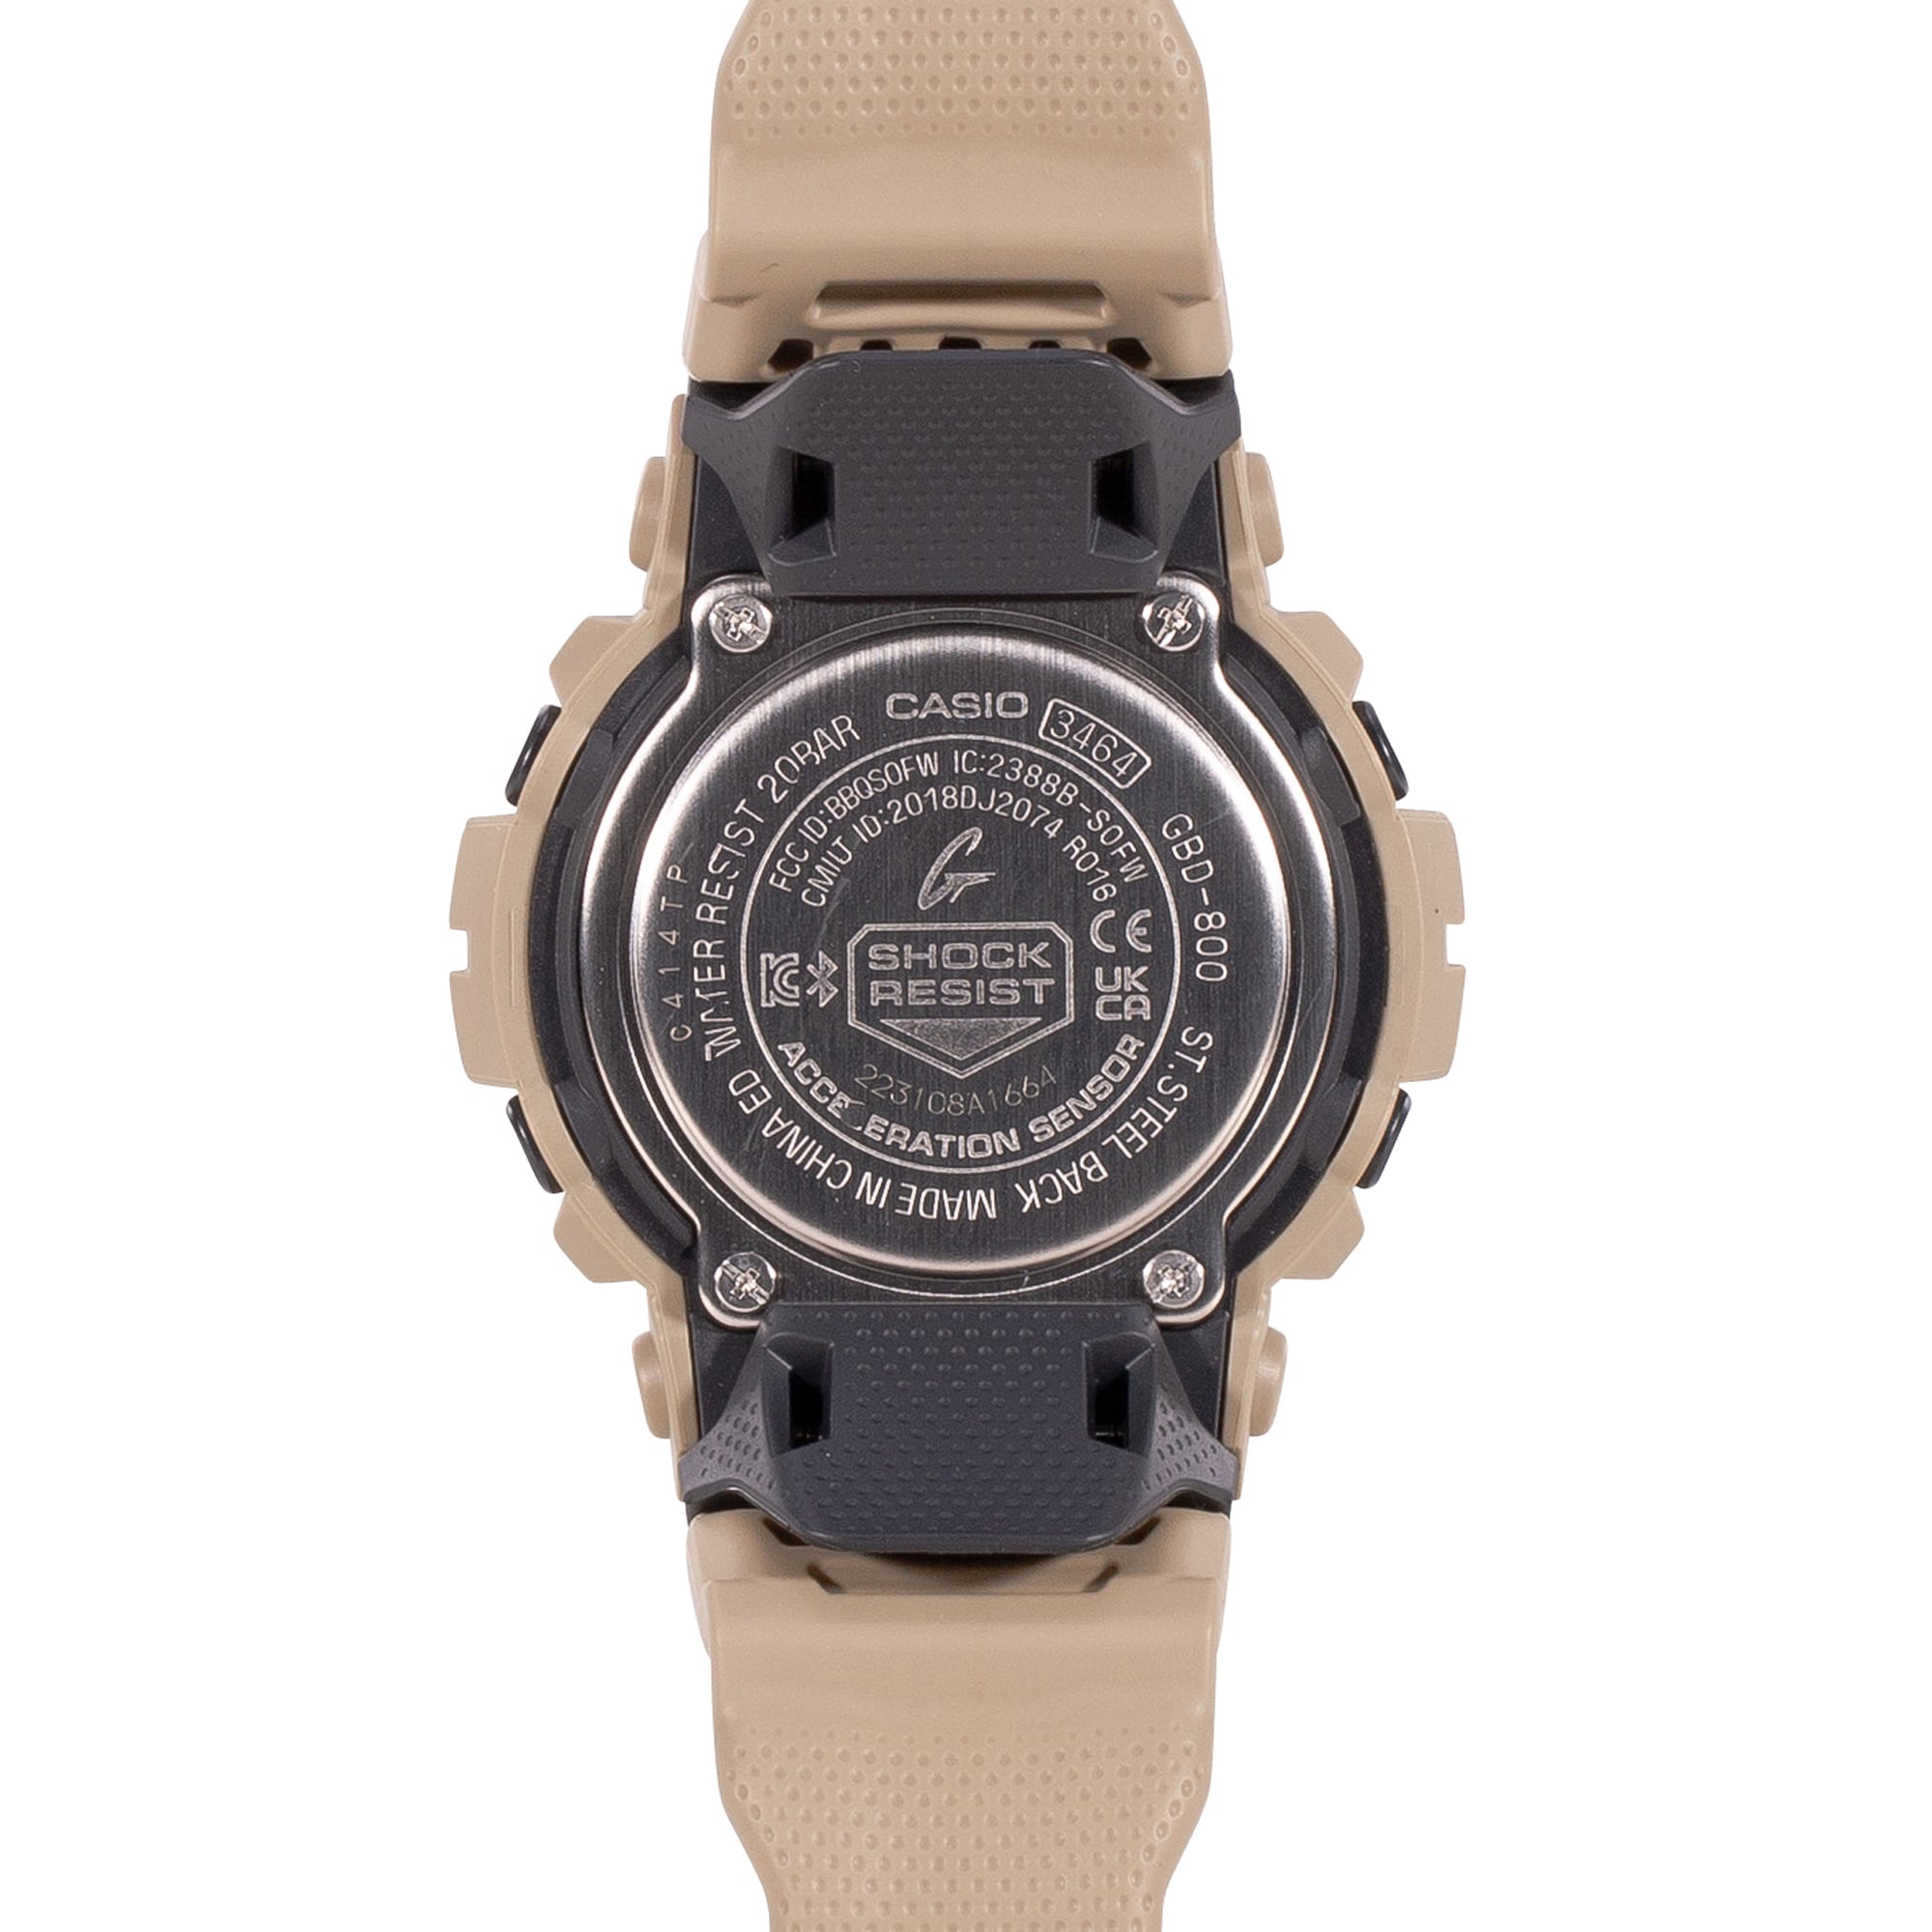 Casio G-Shock Watch th Purchase coyote G-Squad GBD-800UC-5ER by